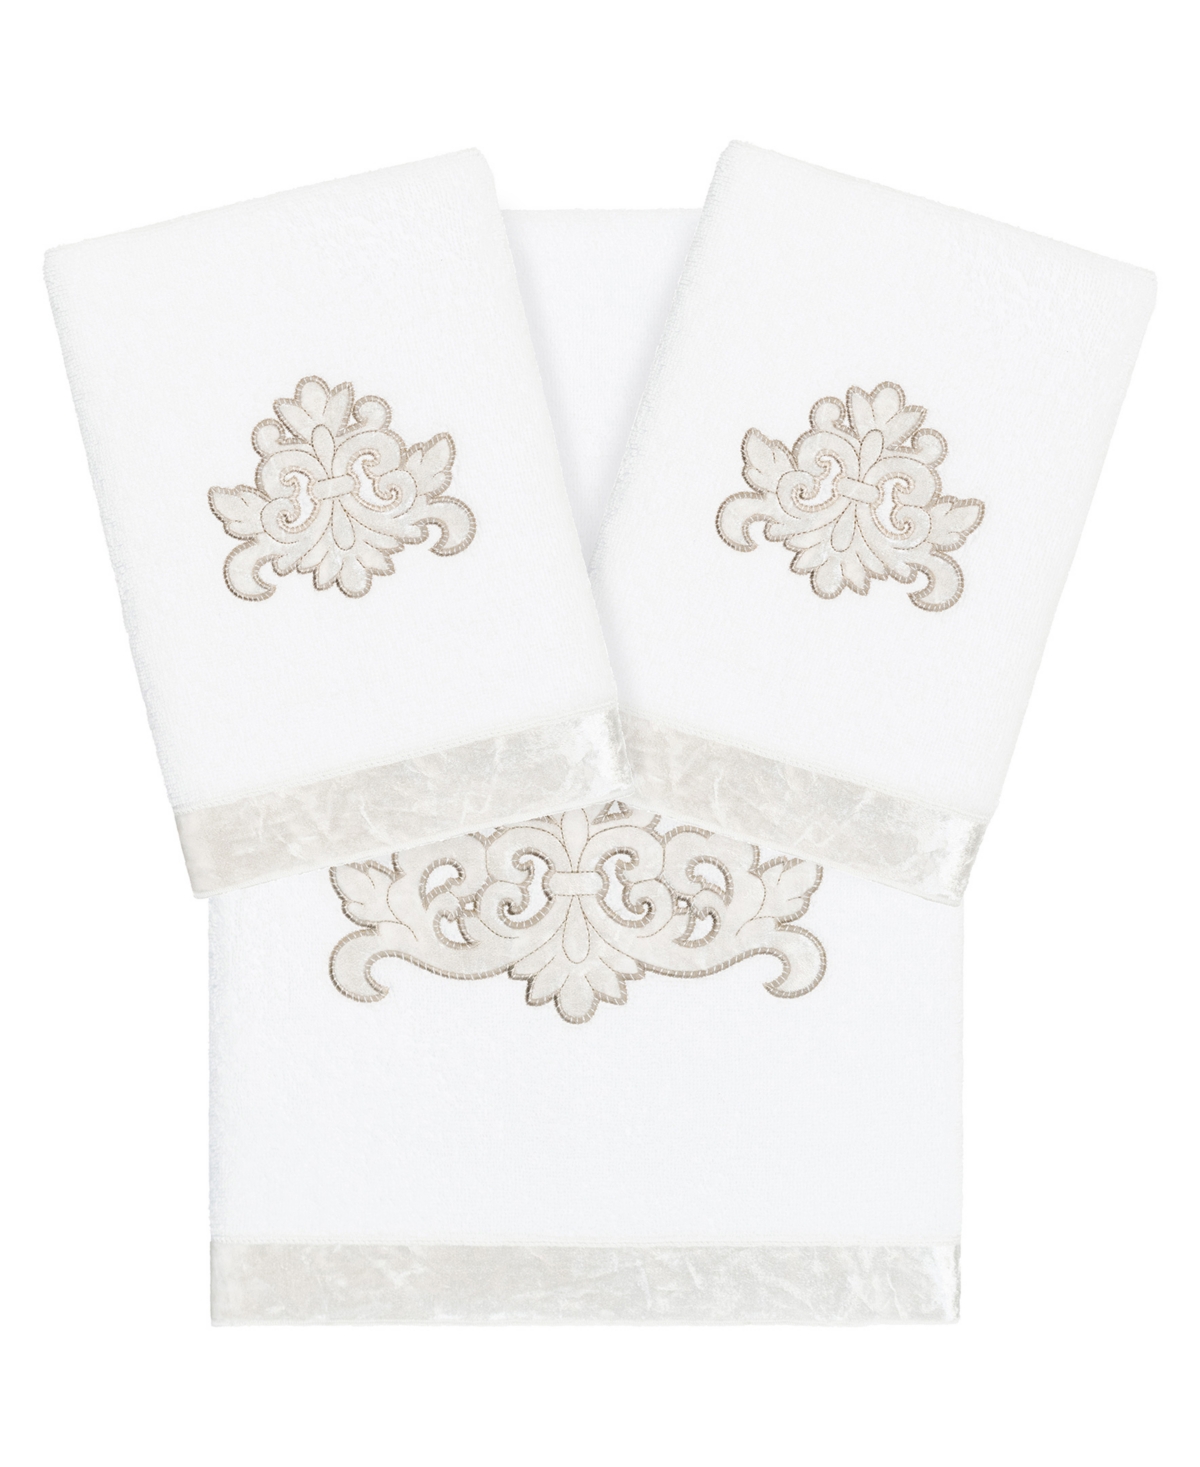 Linum Home Textiles Turkish Cotton May Embellished Towel Set, 3 Piece In White